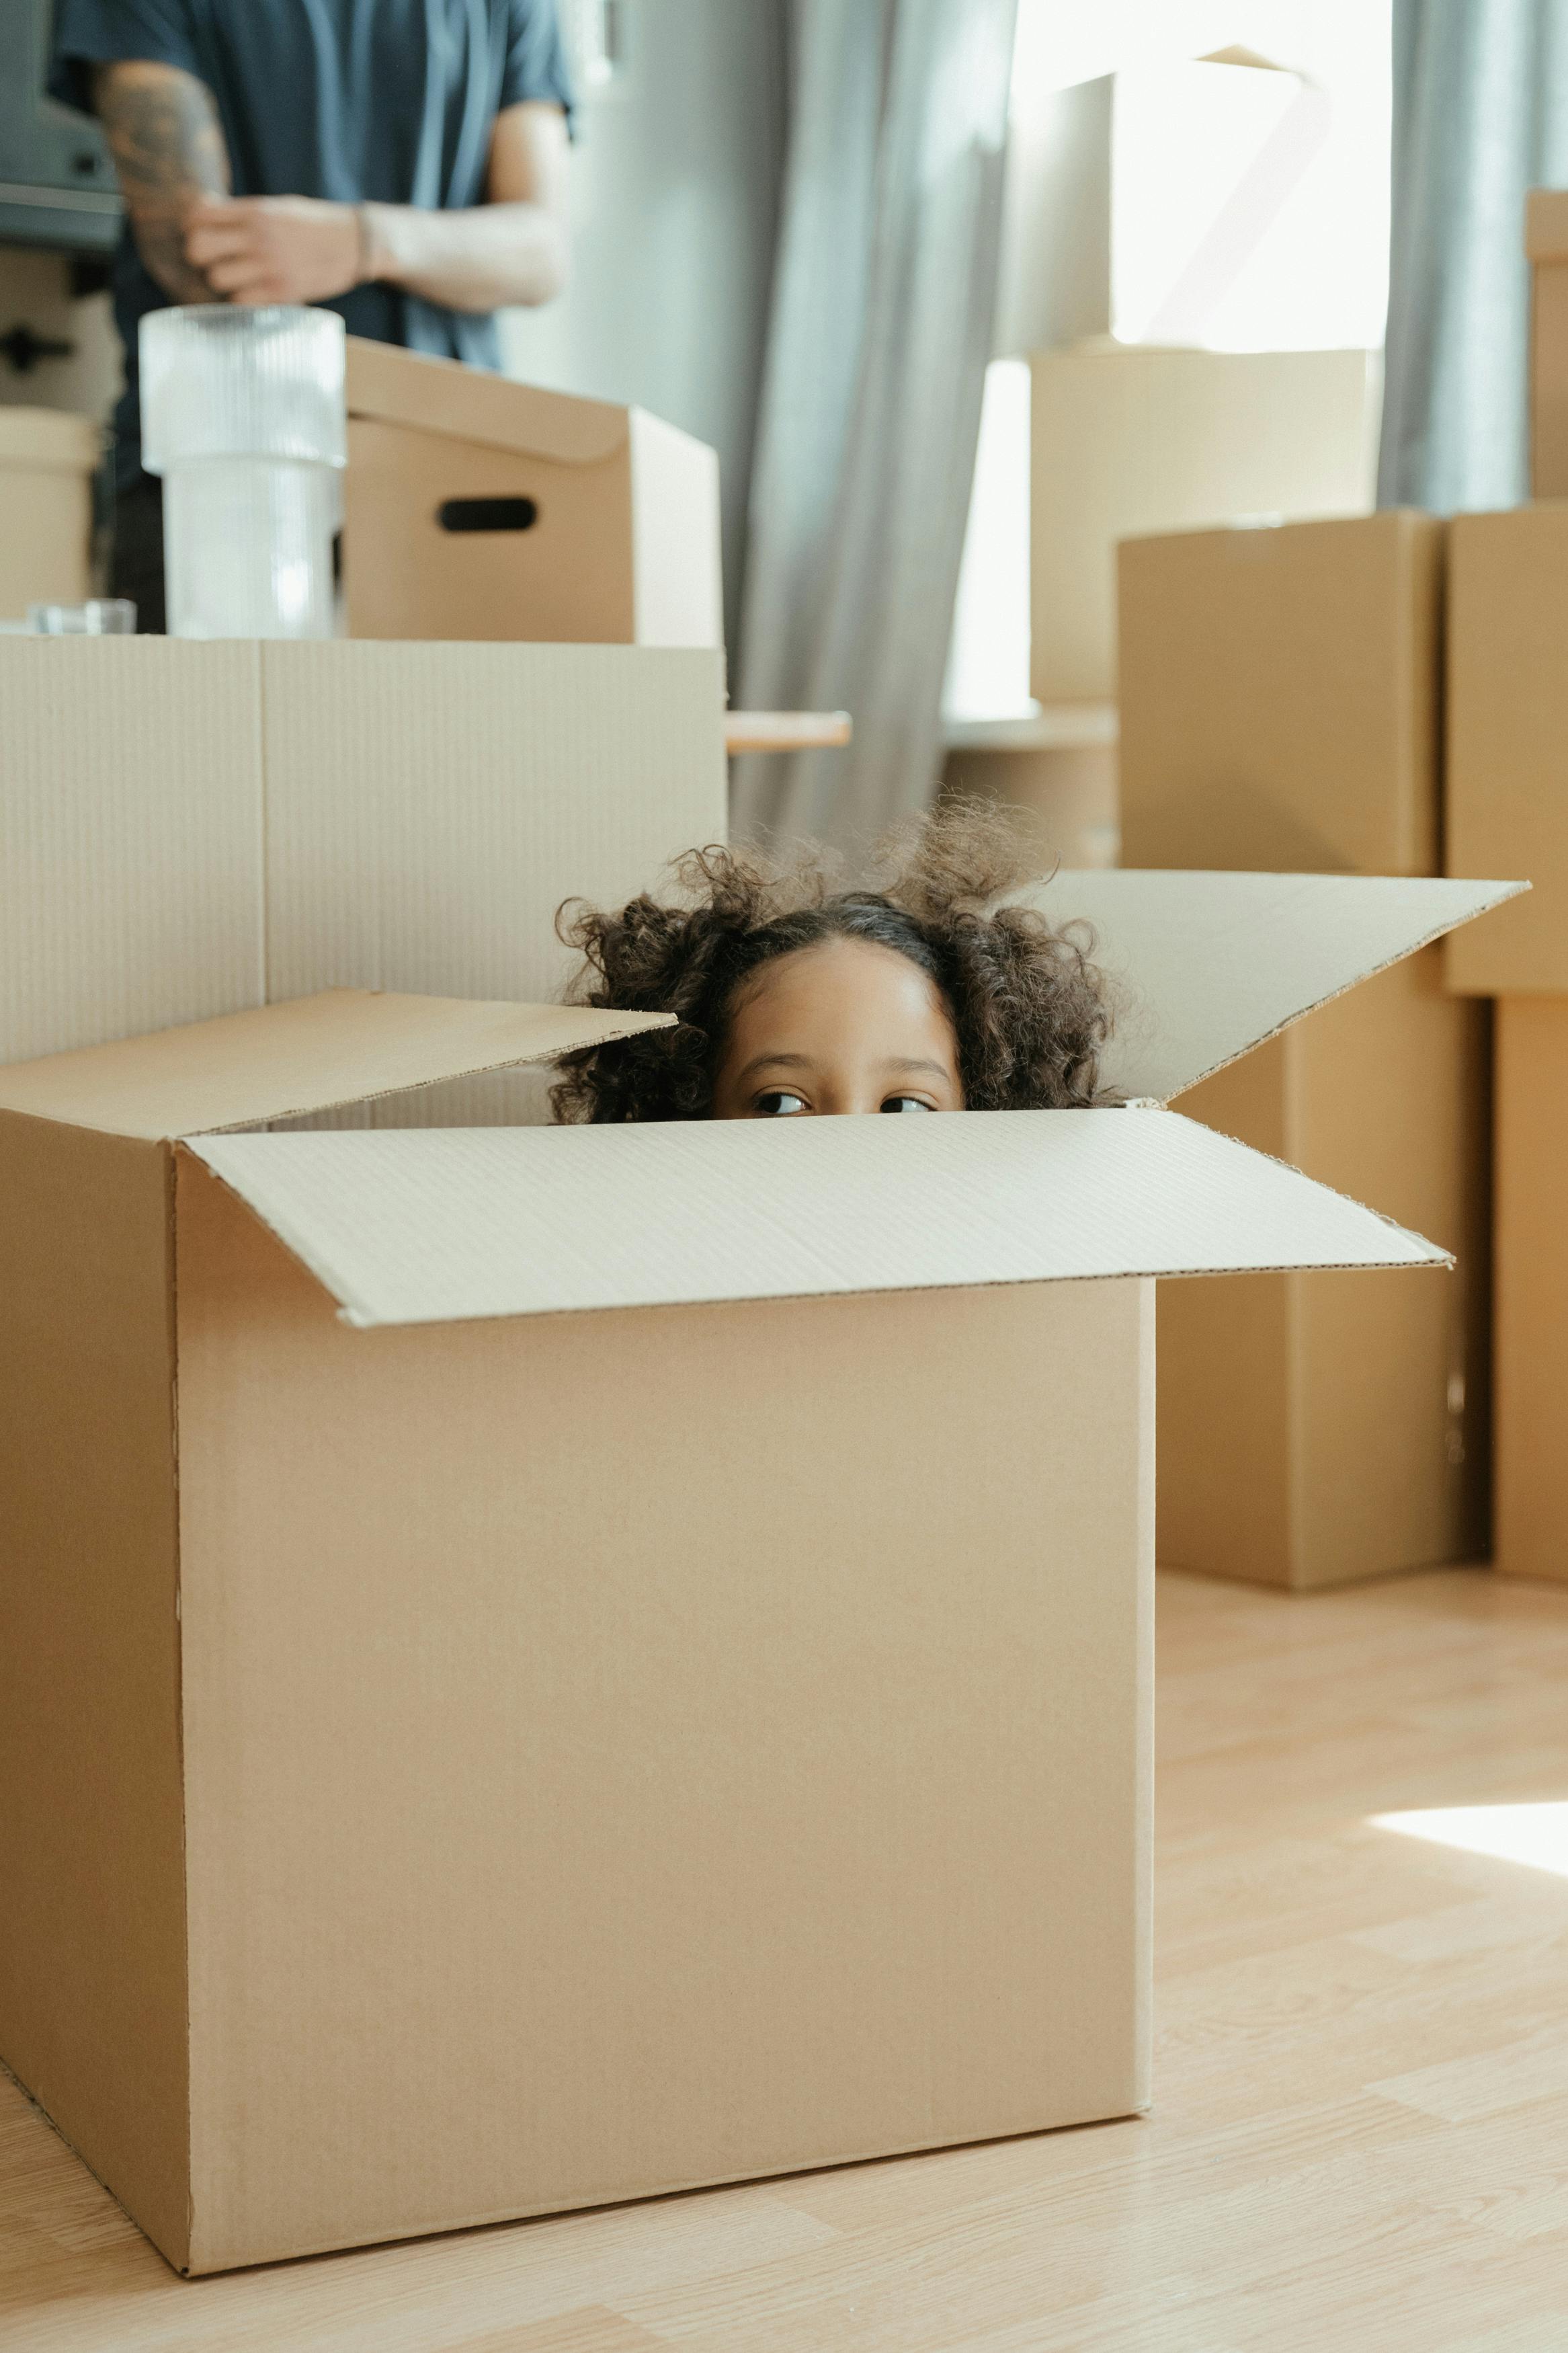 Cute little girl playing in a box while helping the family move